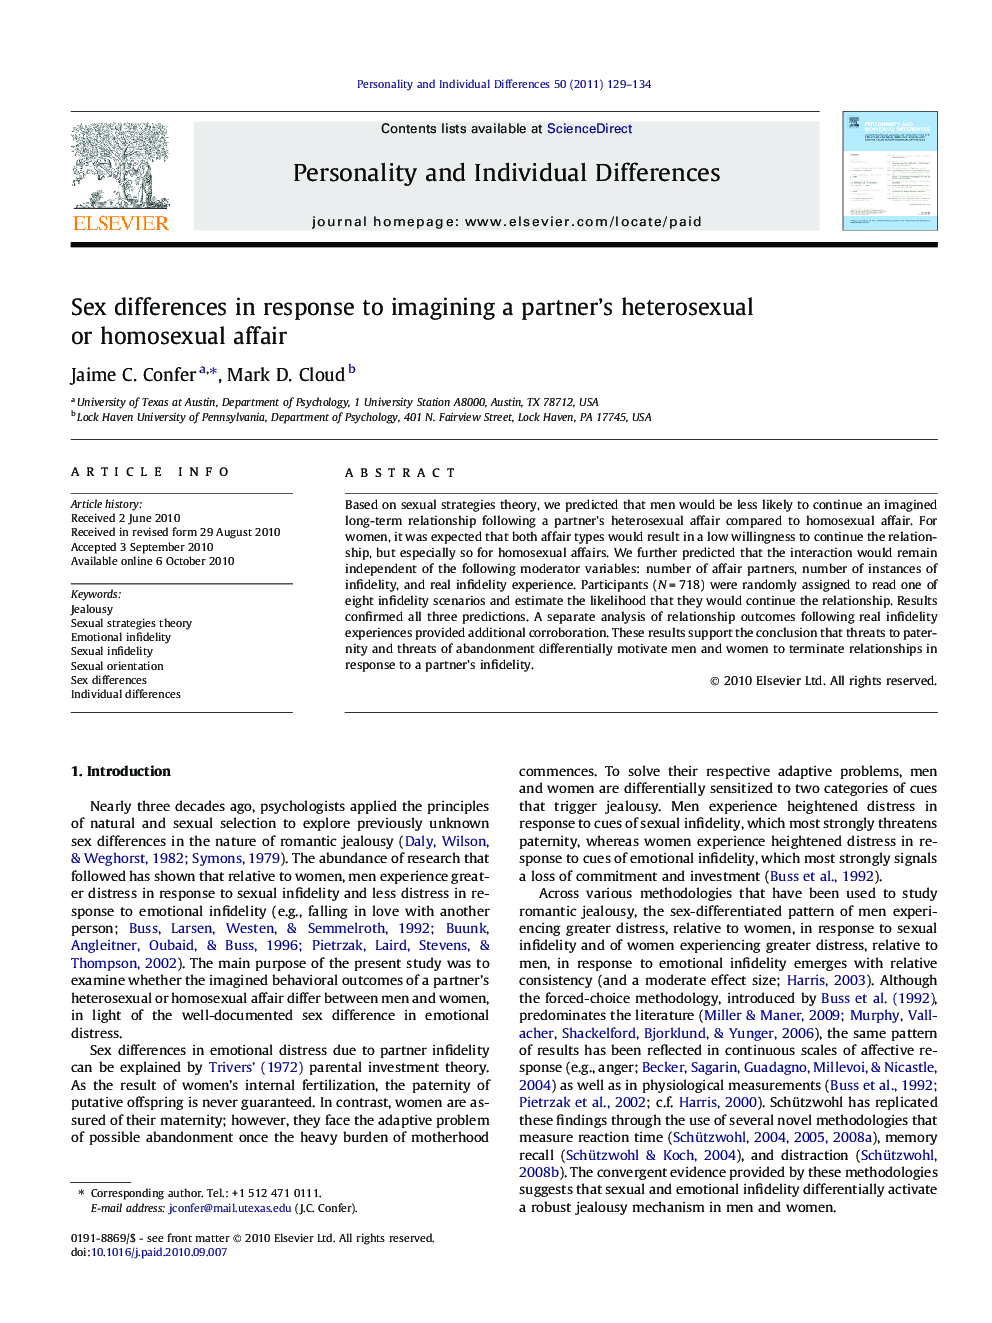 Sex differences in response to imagining a partner’s heterosexual or homosexual affair